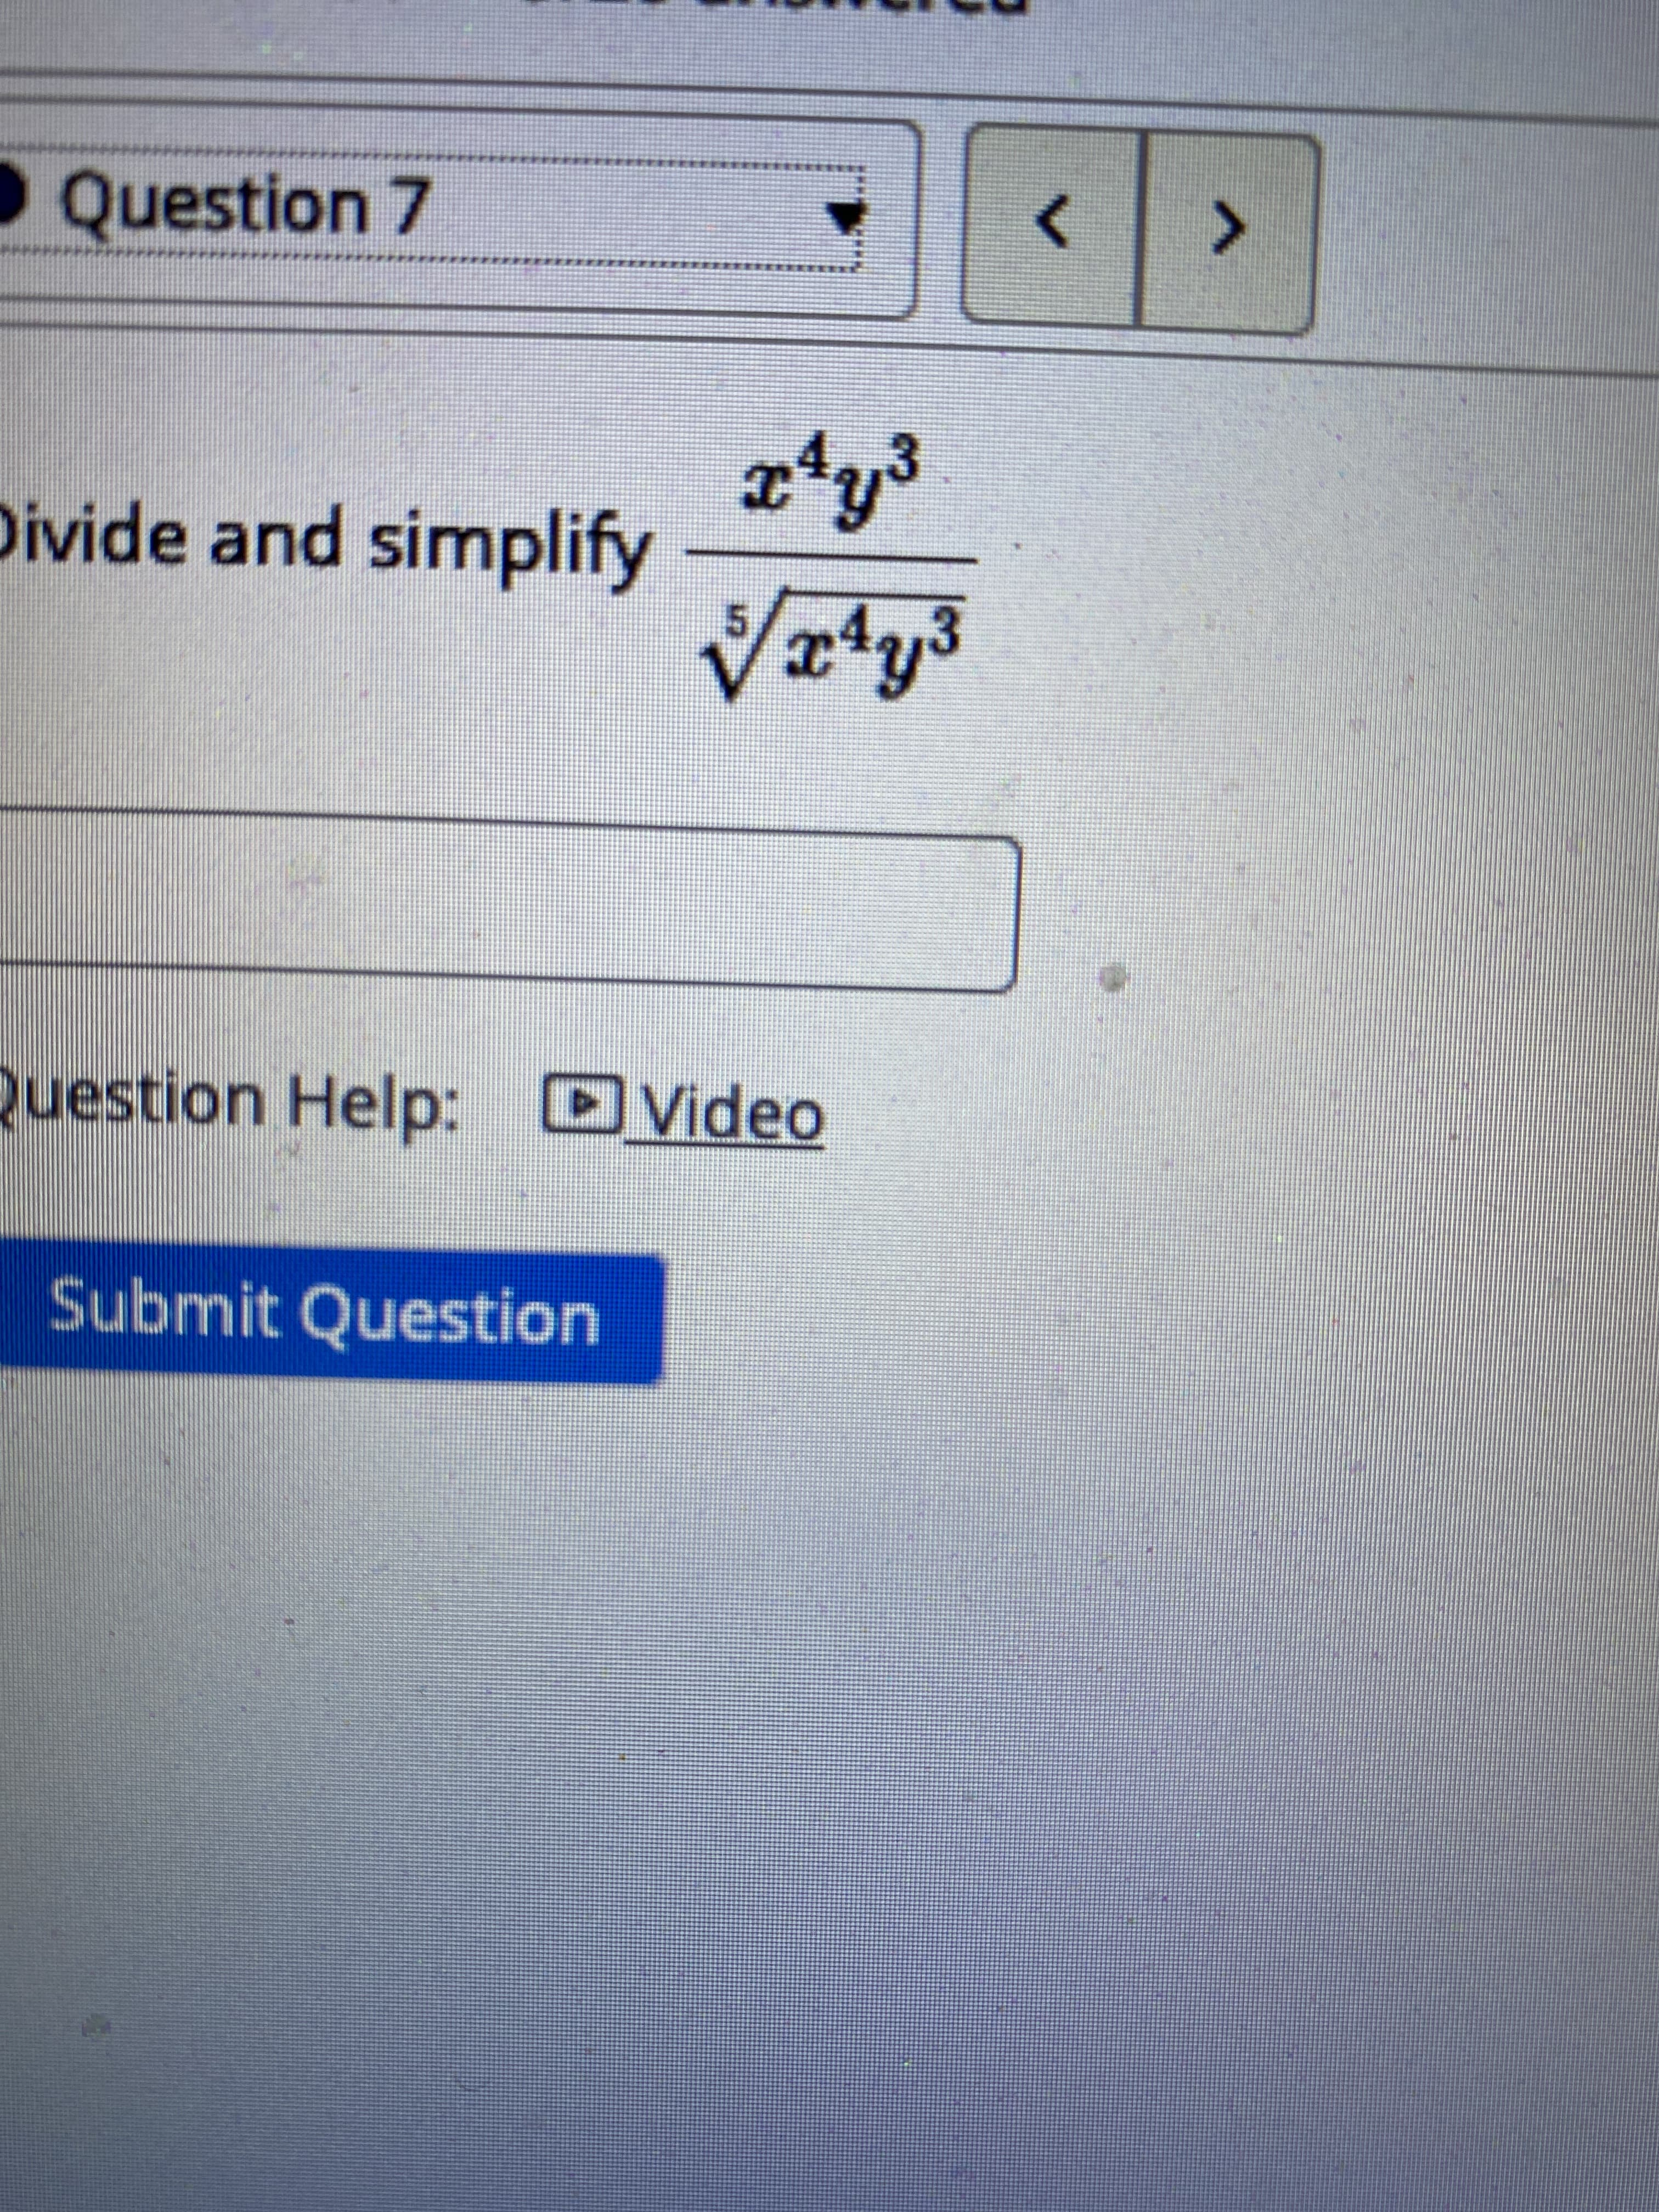 Question 7
<>
.3
Divide and simplify
,3
Question Help: Video
Submit Question
